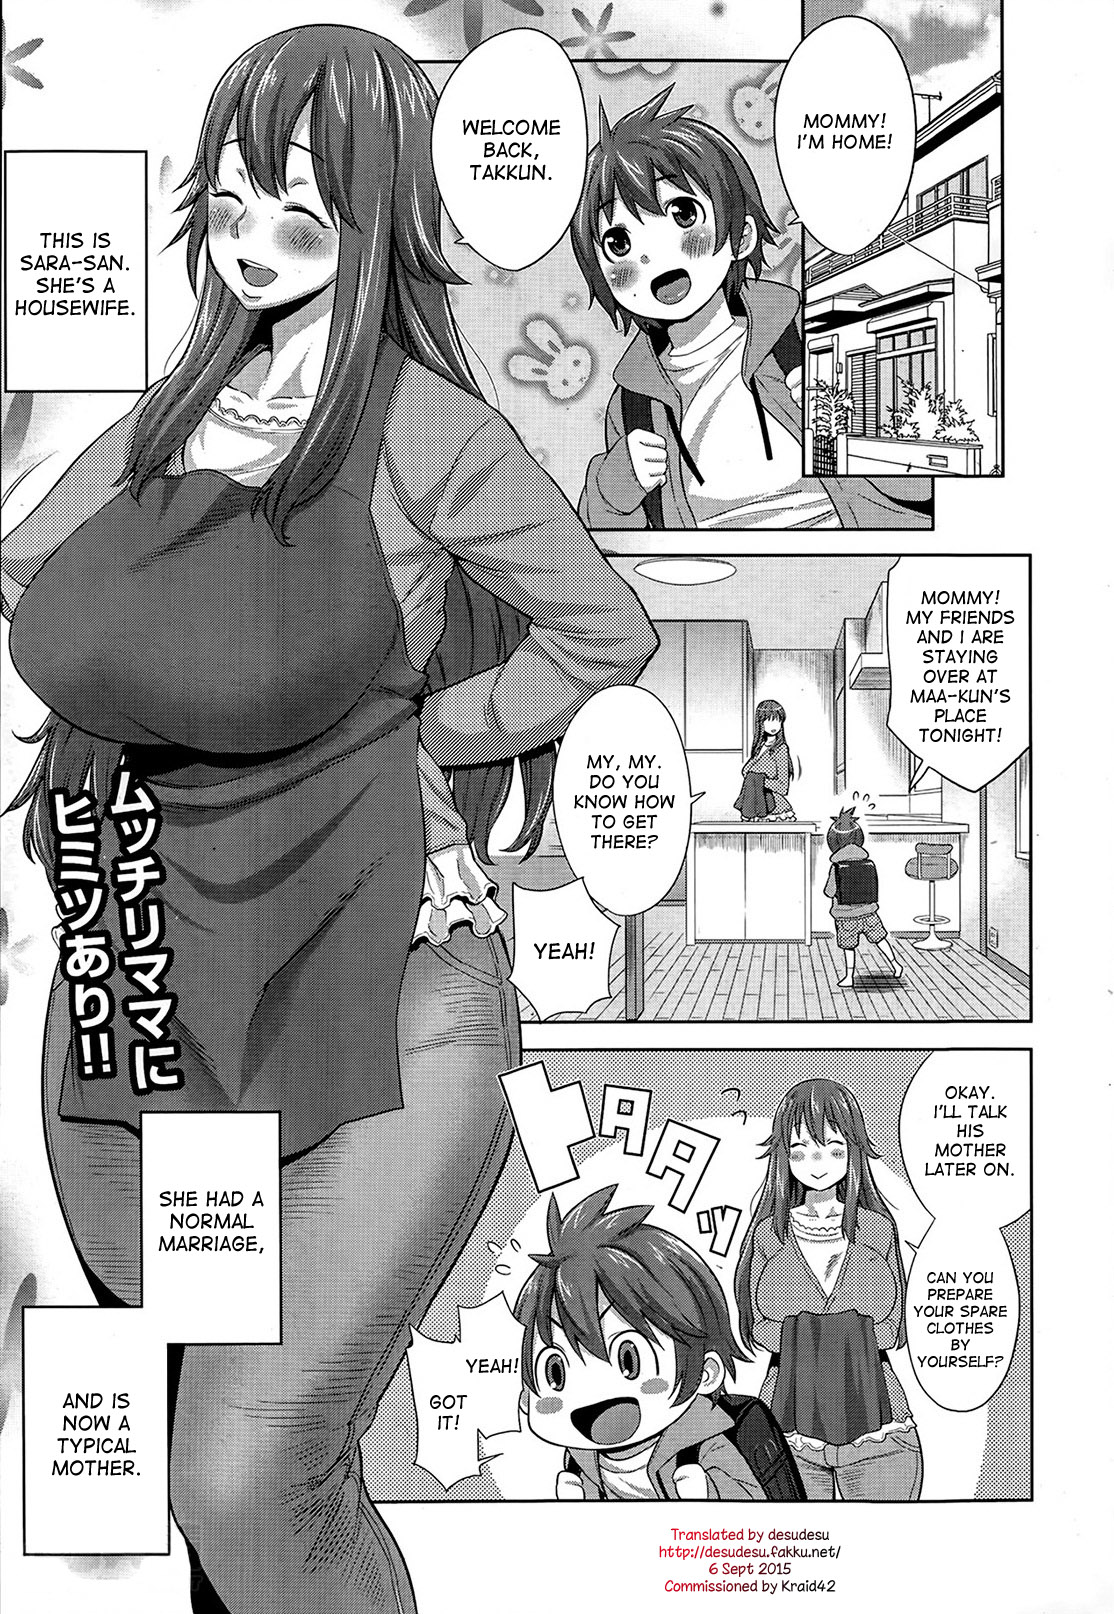 This Mother is a Pervert by Agata Hentai Comics